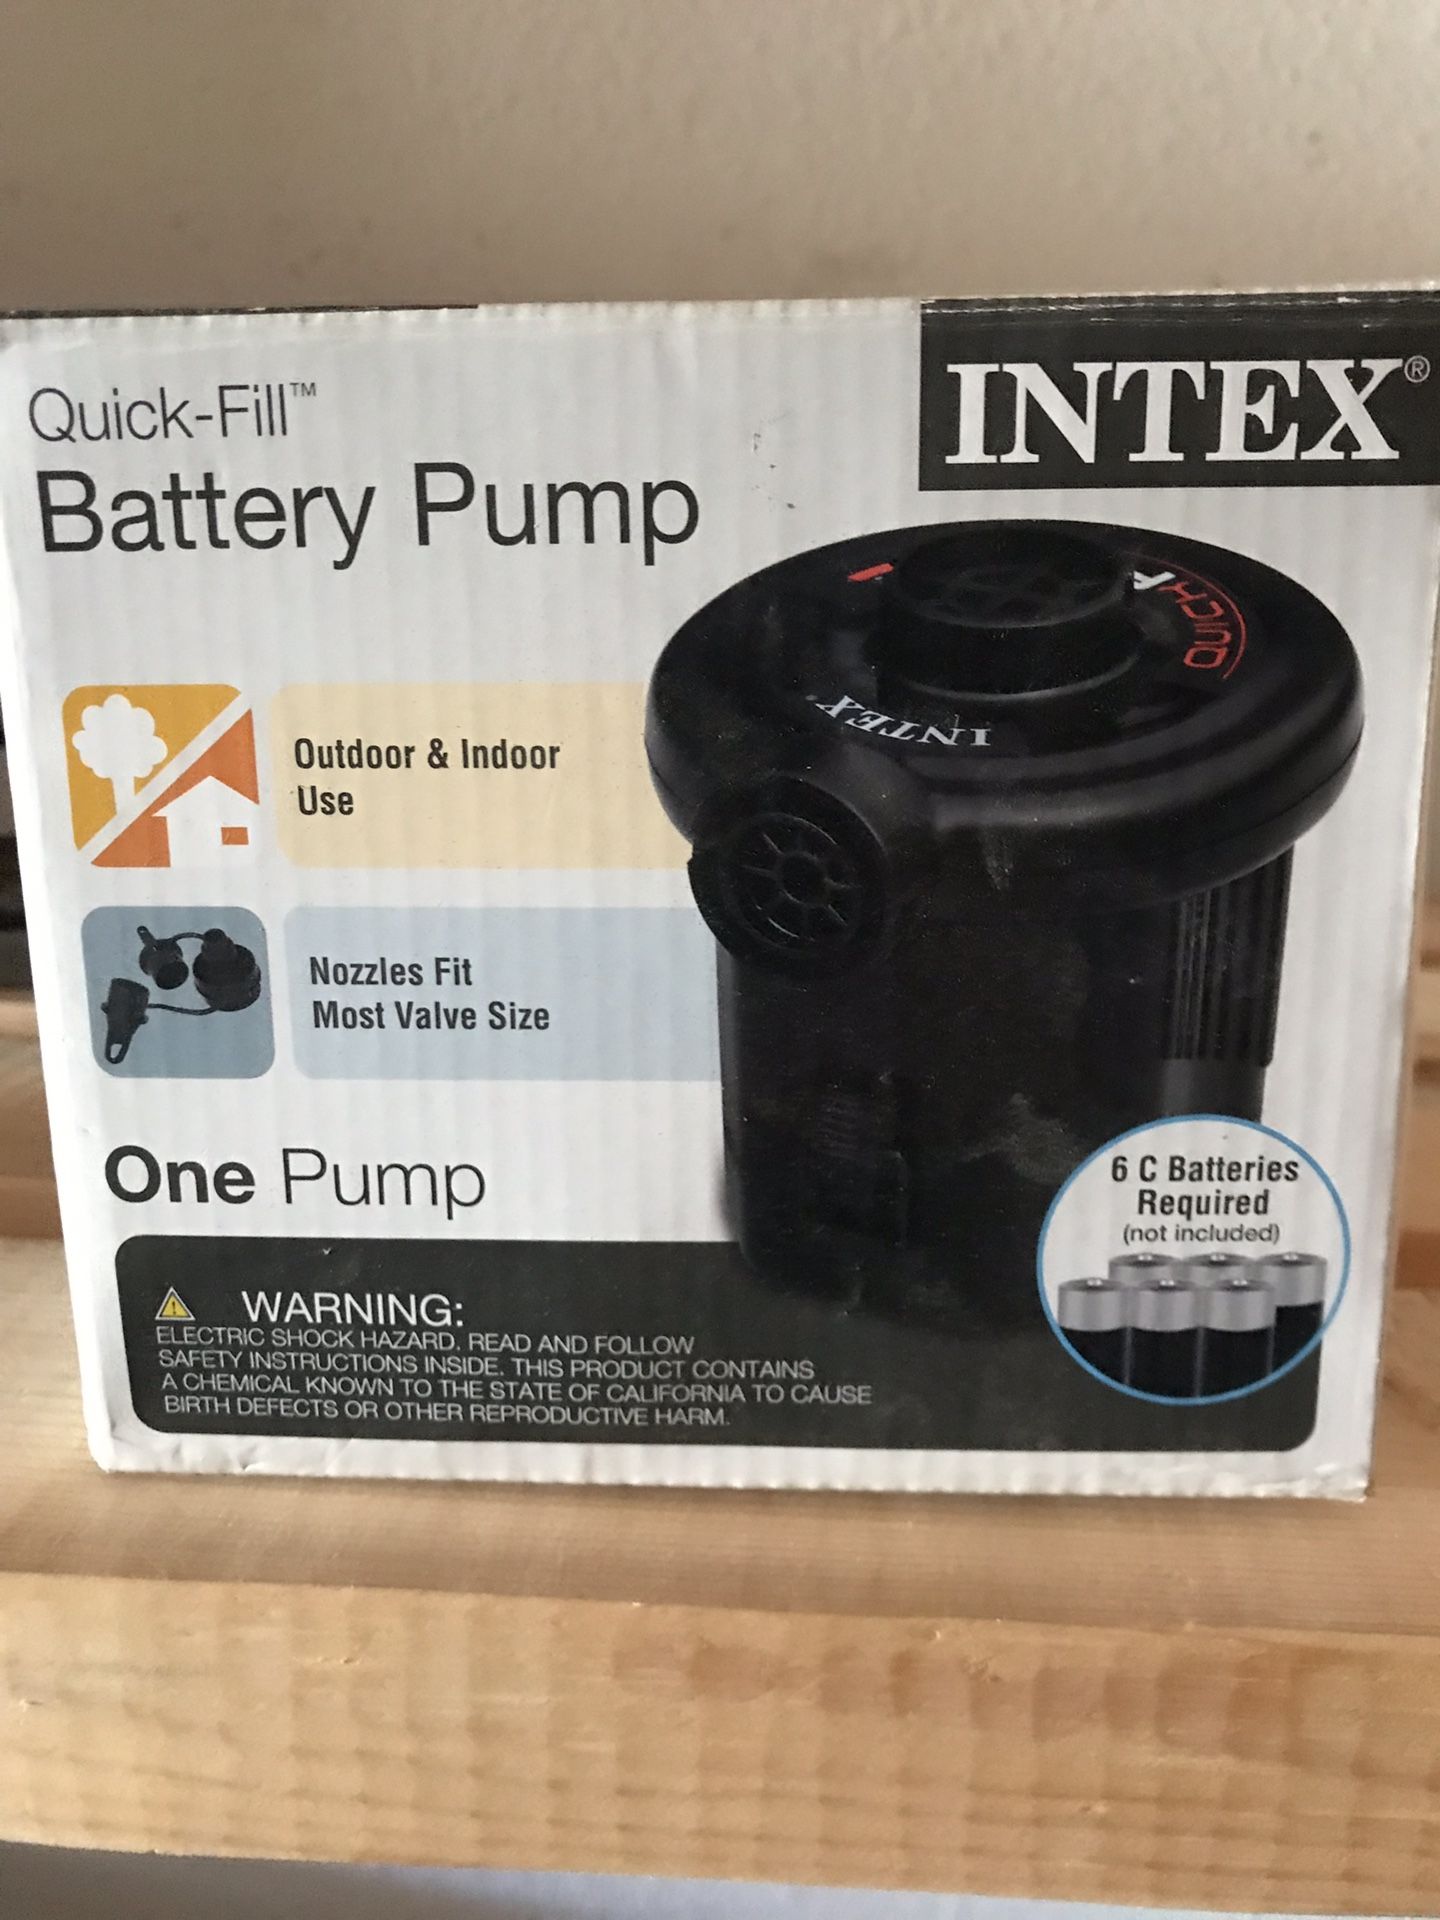 Battery powered handheld pump. Great for air mattresses and pool toys!